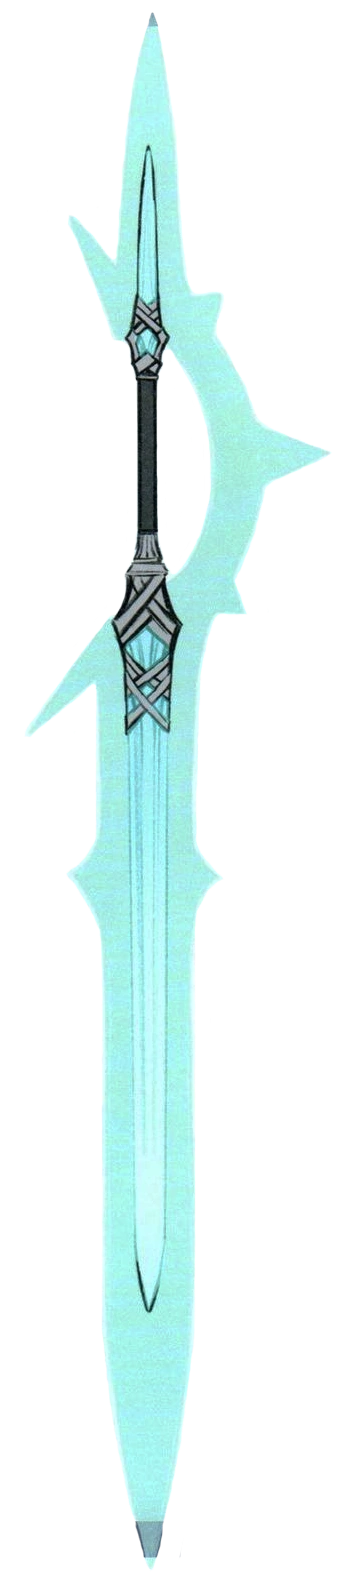 Illustrated light cyan sword with a black handle in the top-middle, silver ornamentation near the handle, and a bright cyan aura that arcs around the right of the handle